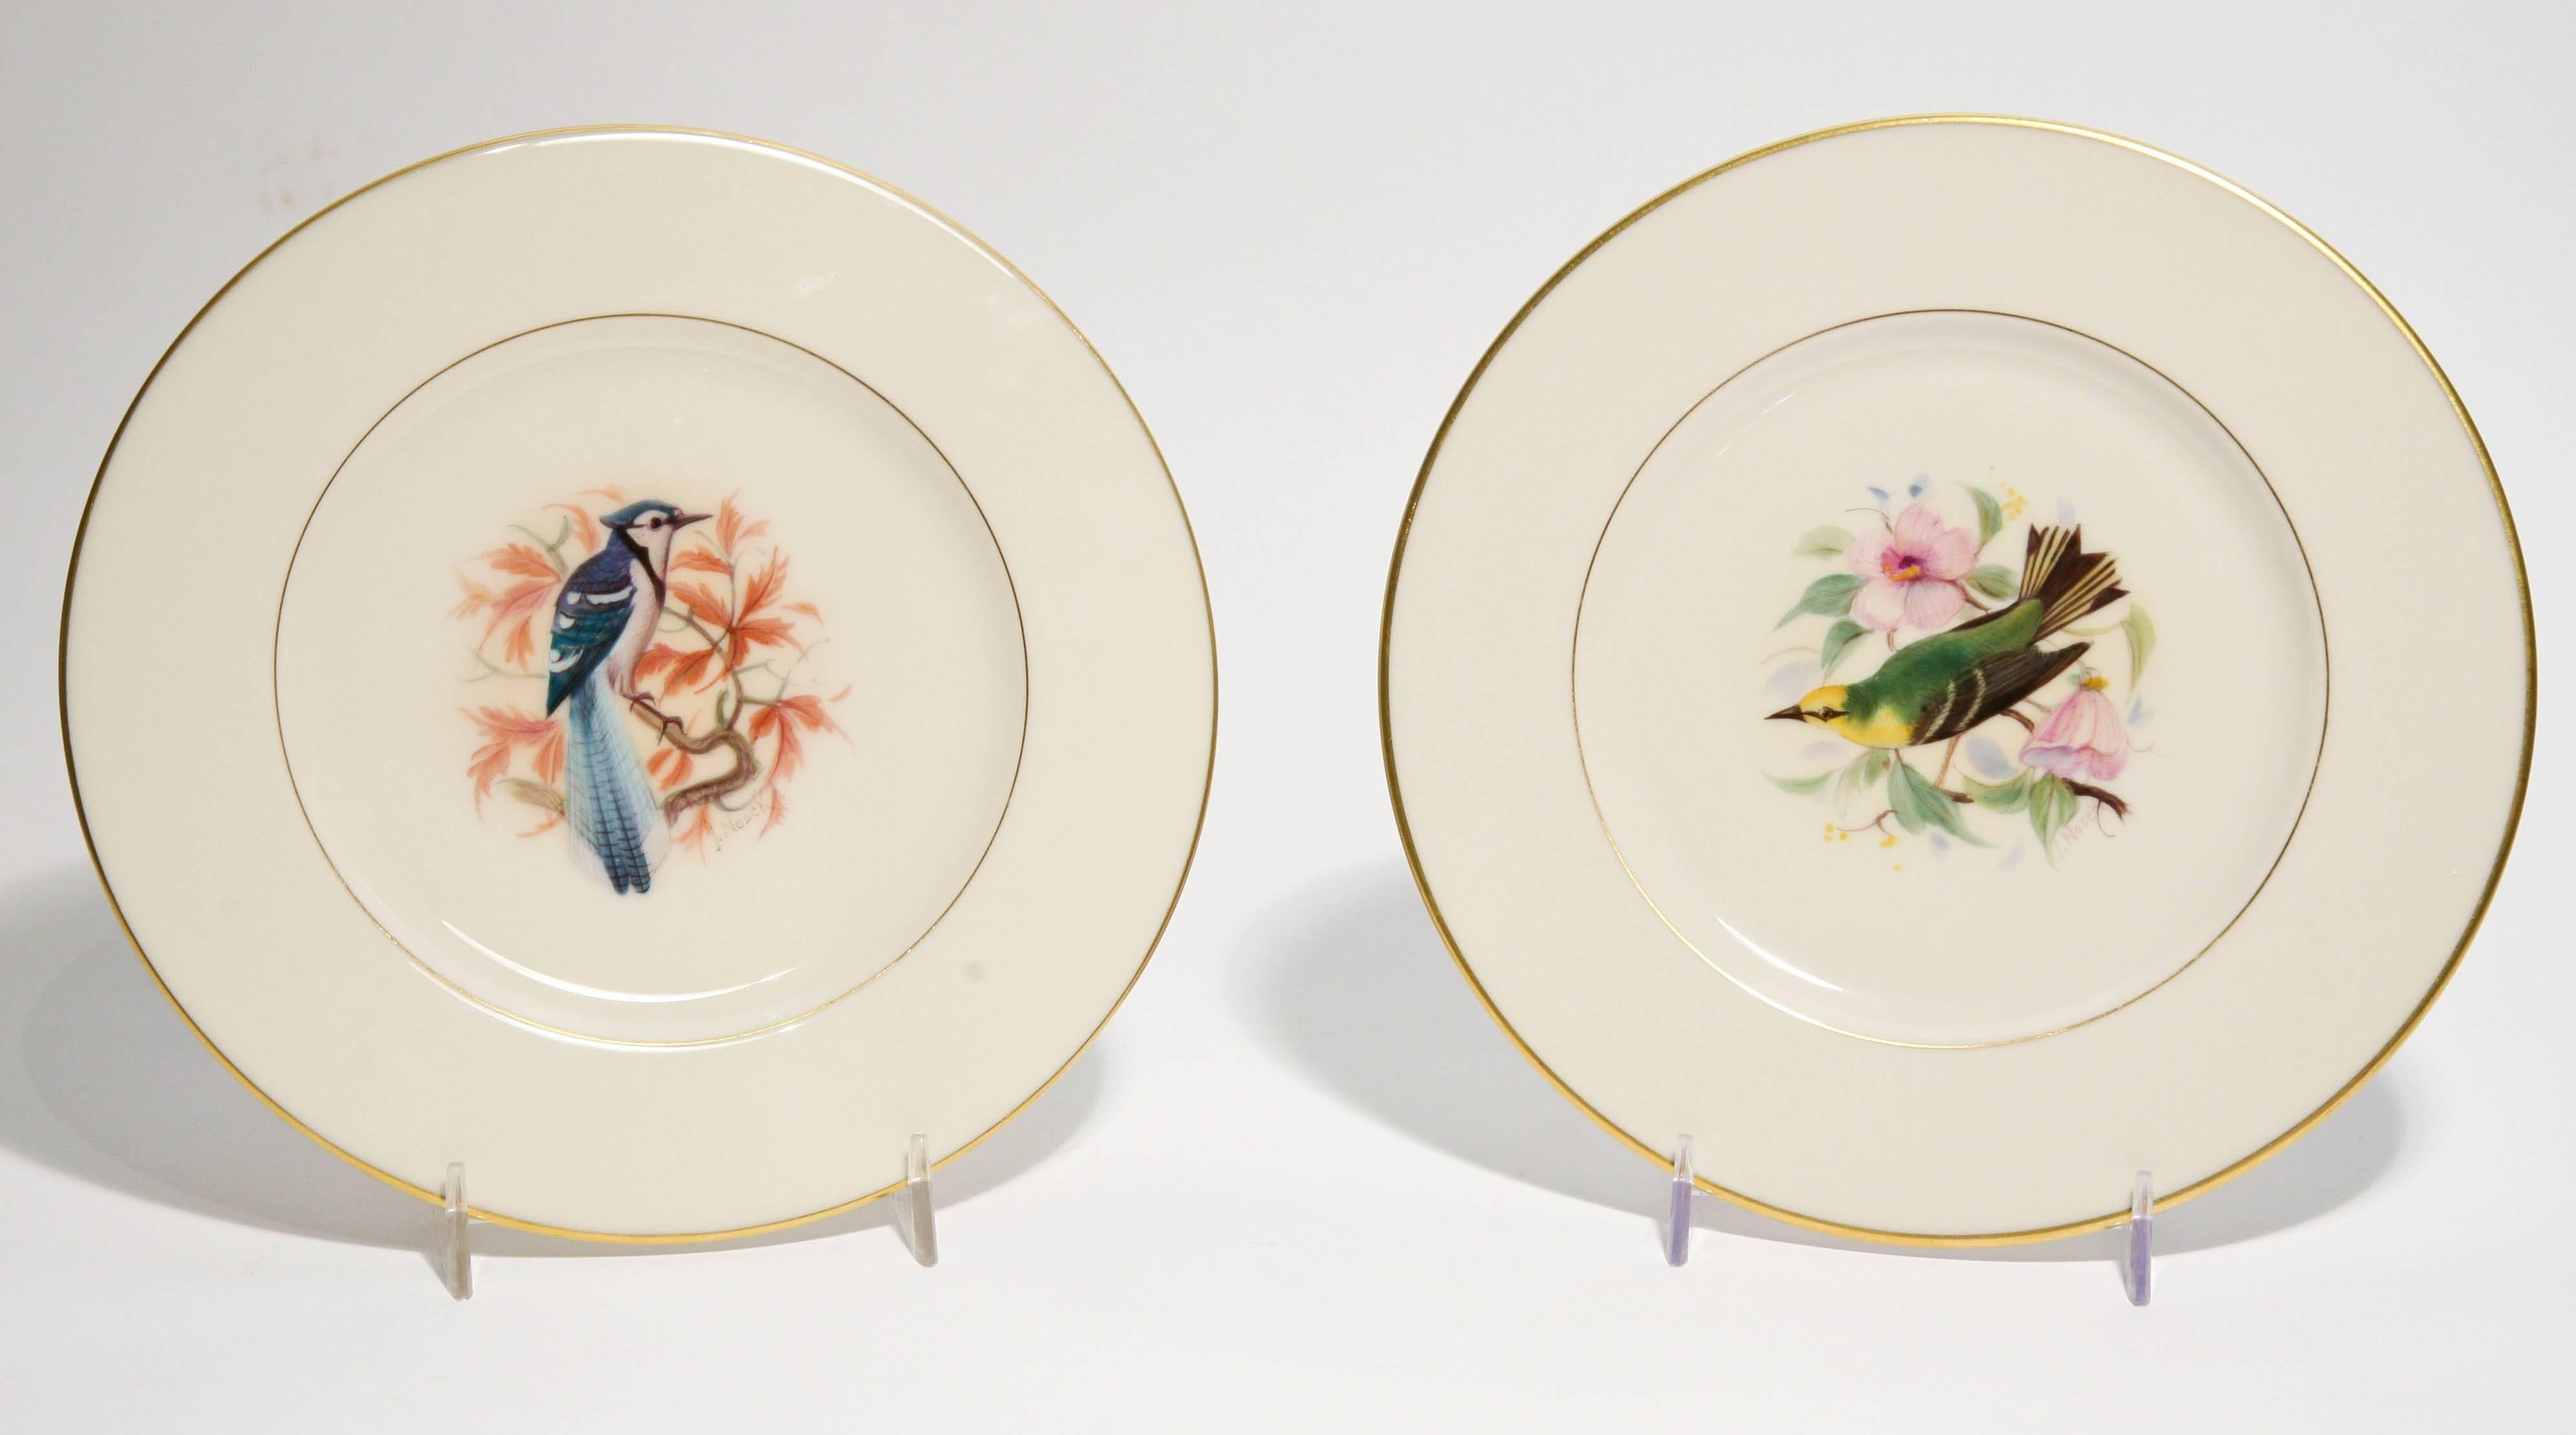 Hand-Crafted Eight Dessert Plates Hand-Painted, Artist Signed, Delightful Songbirds